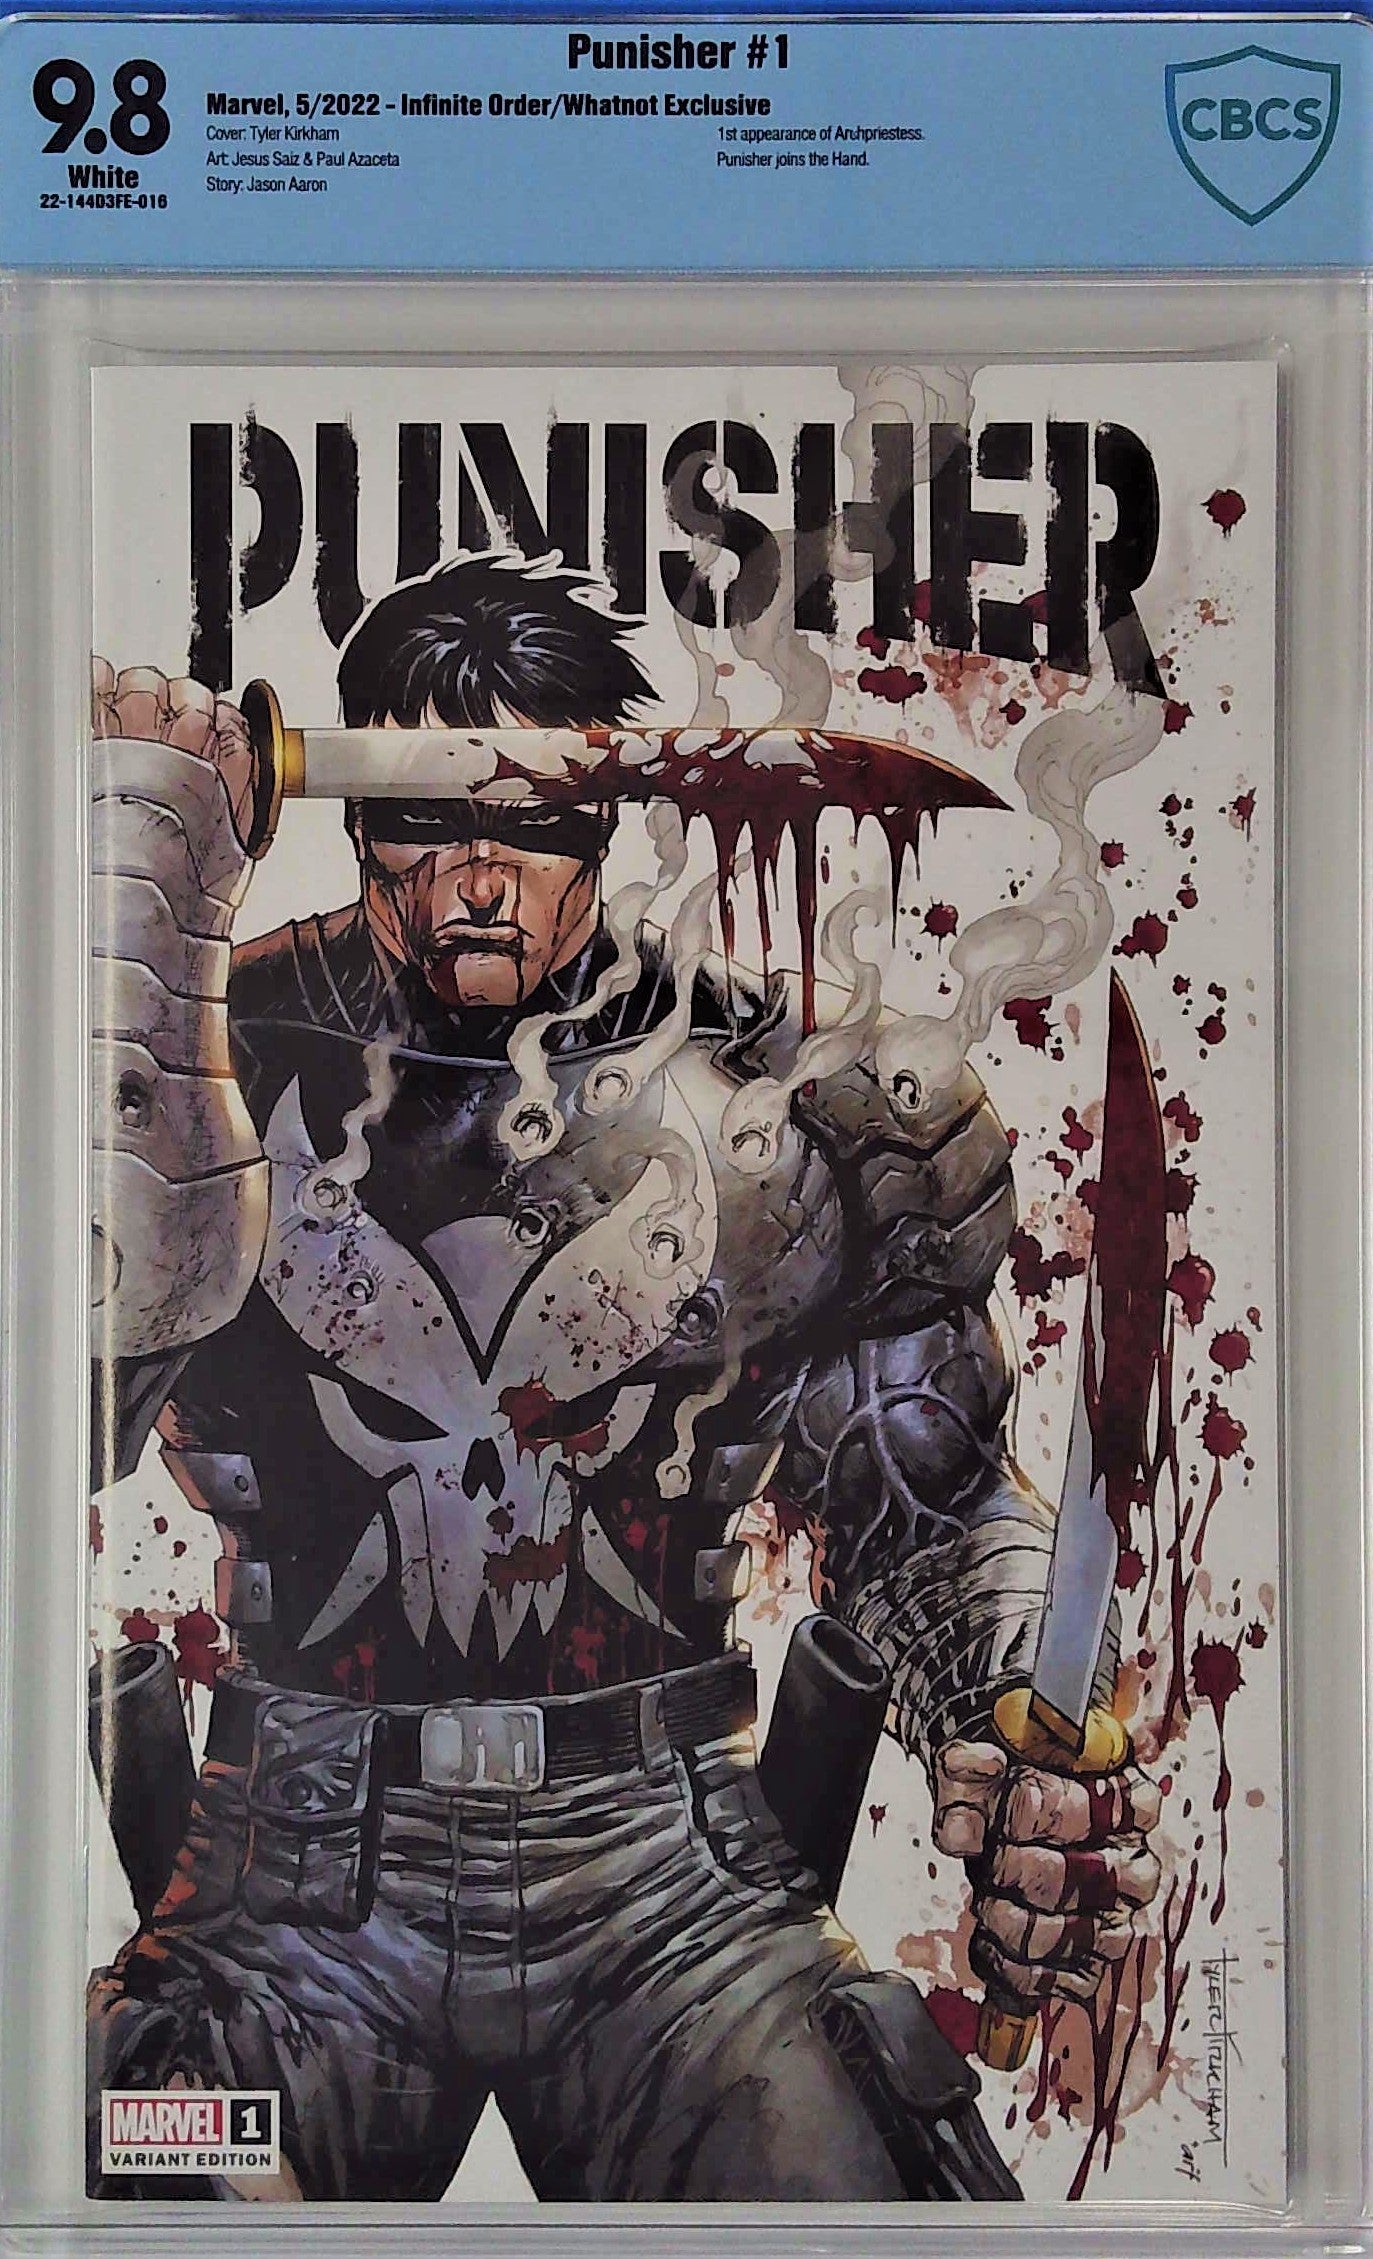 Punisher #1 Infinite Order/Whatnot Exclusive CBCS 9.8 Blue Label